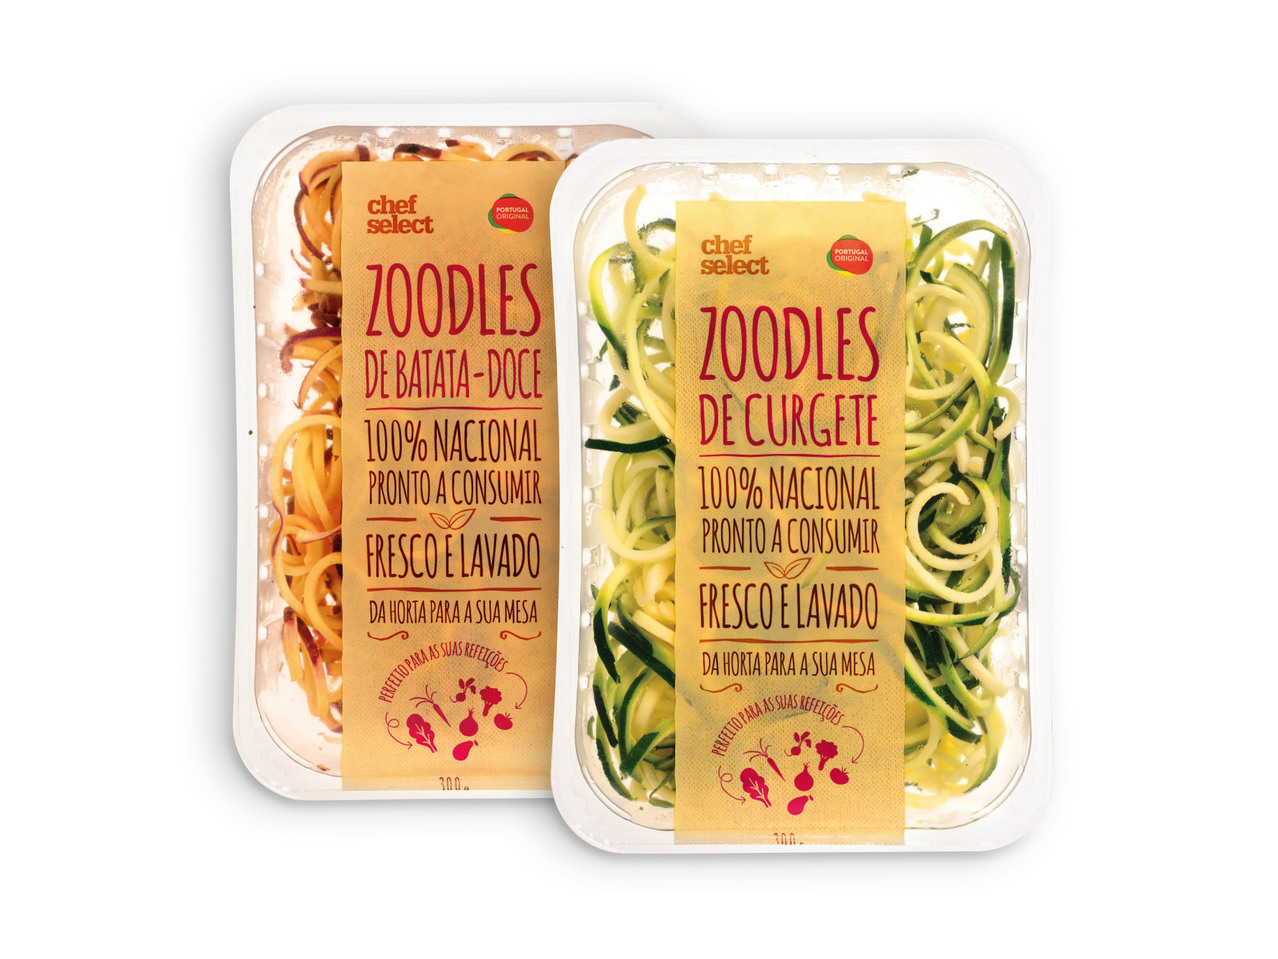 CHEF SELECT(R) Zoodles Curgete / Batata Doce